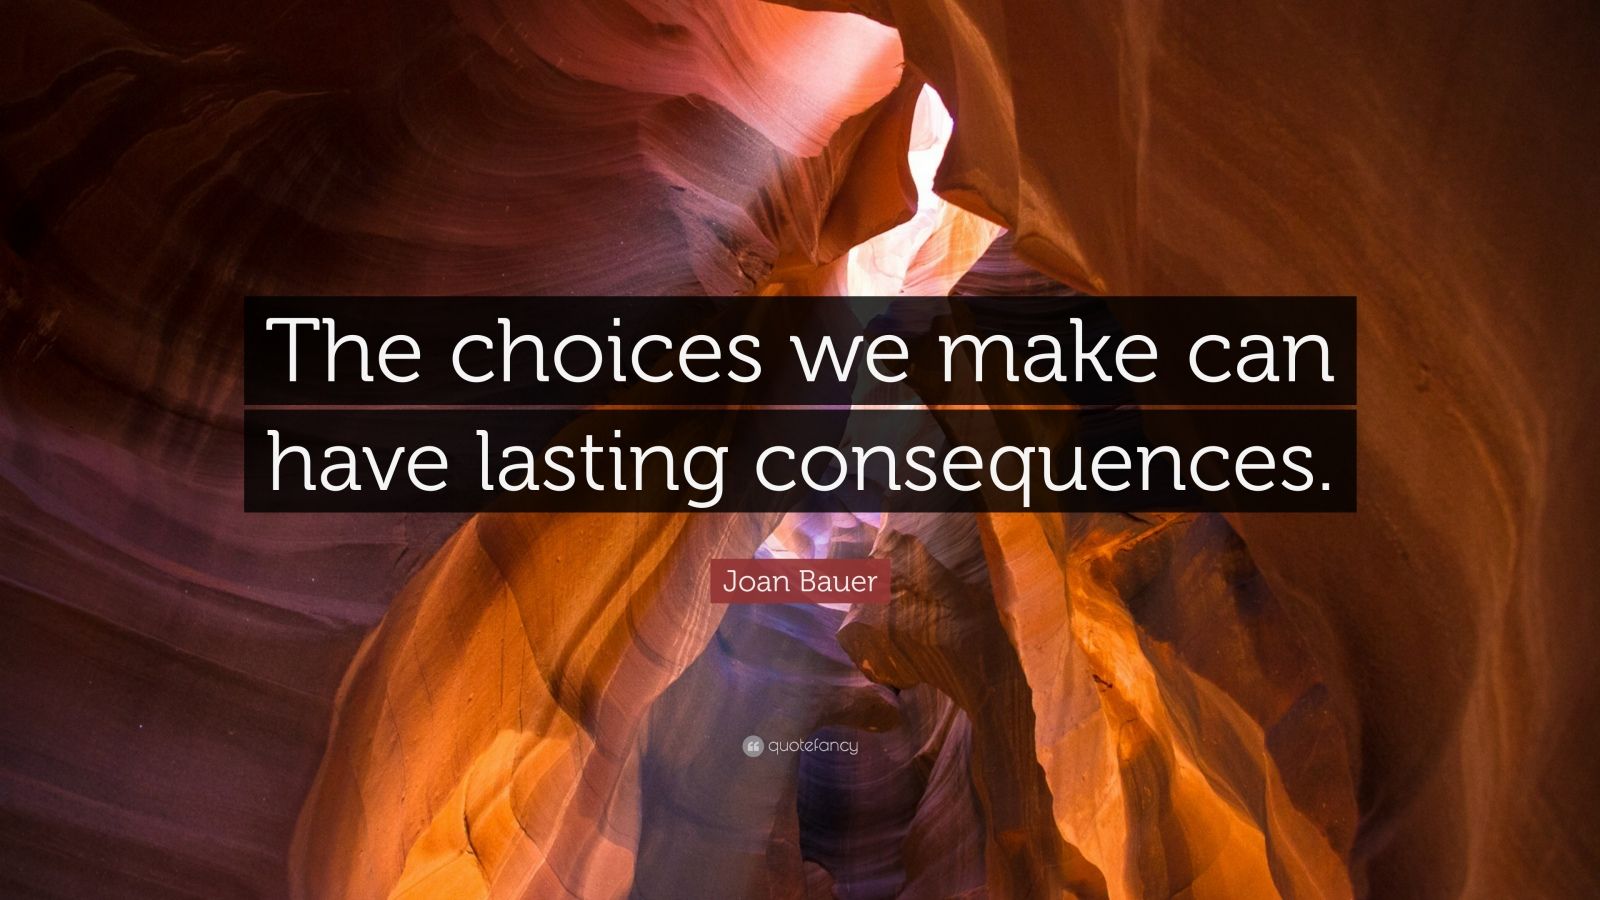 quotes about decisions and consequences by famous people